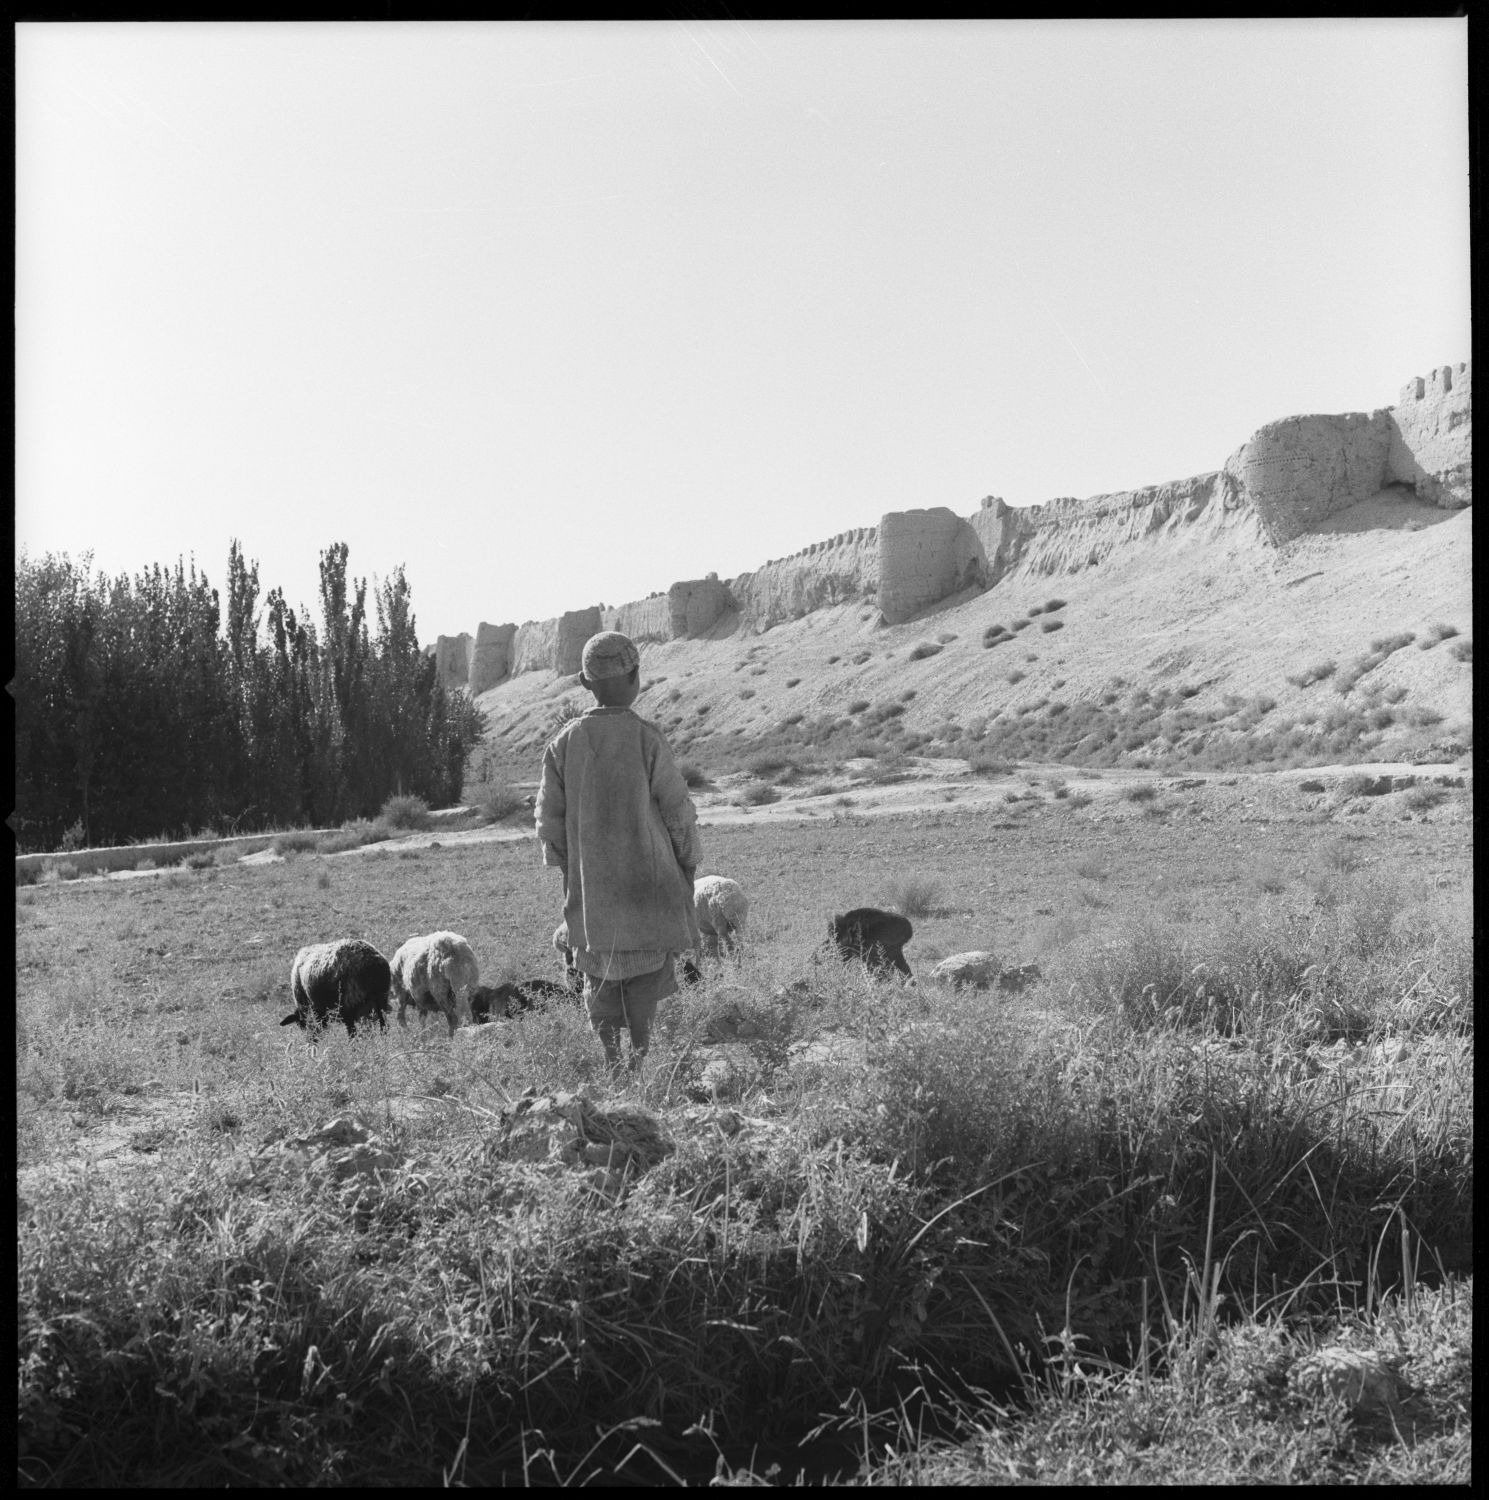 General view of walls with man and grazing sheep in foreground.